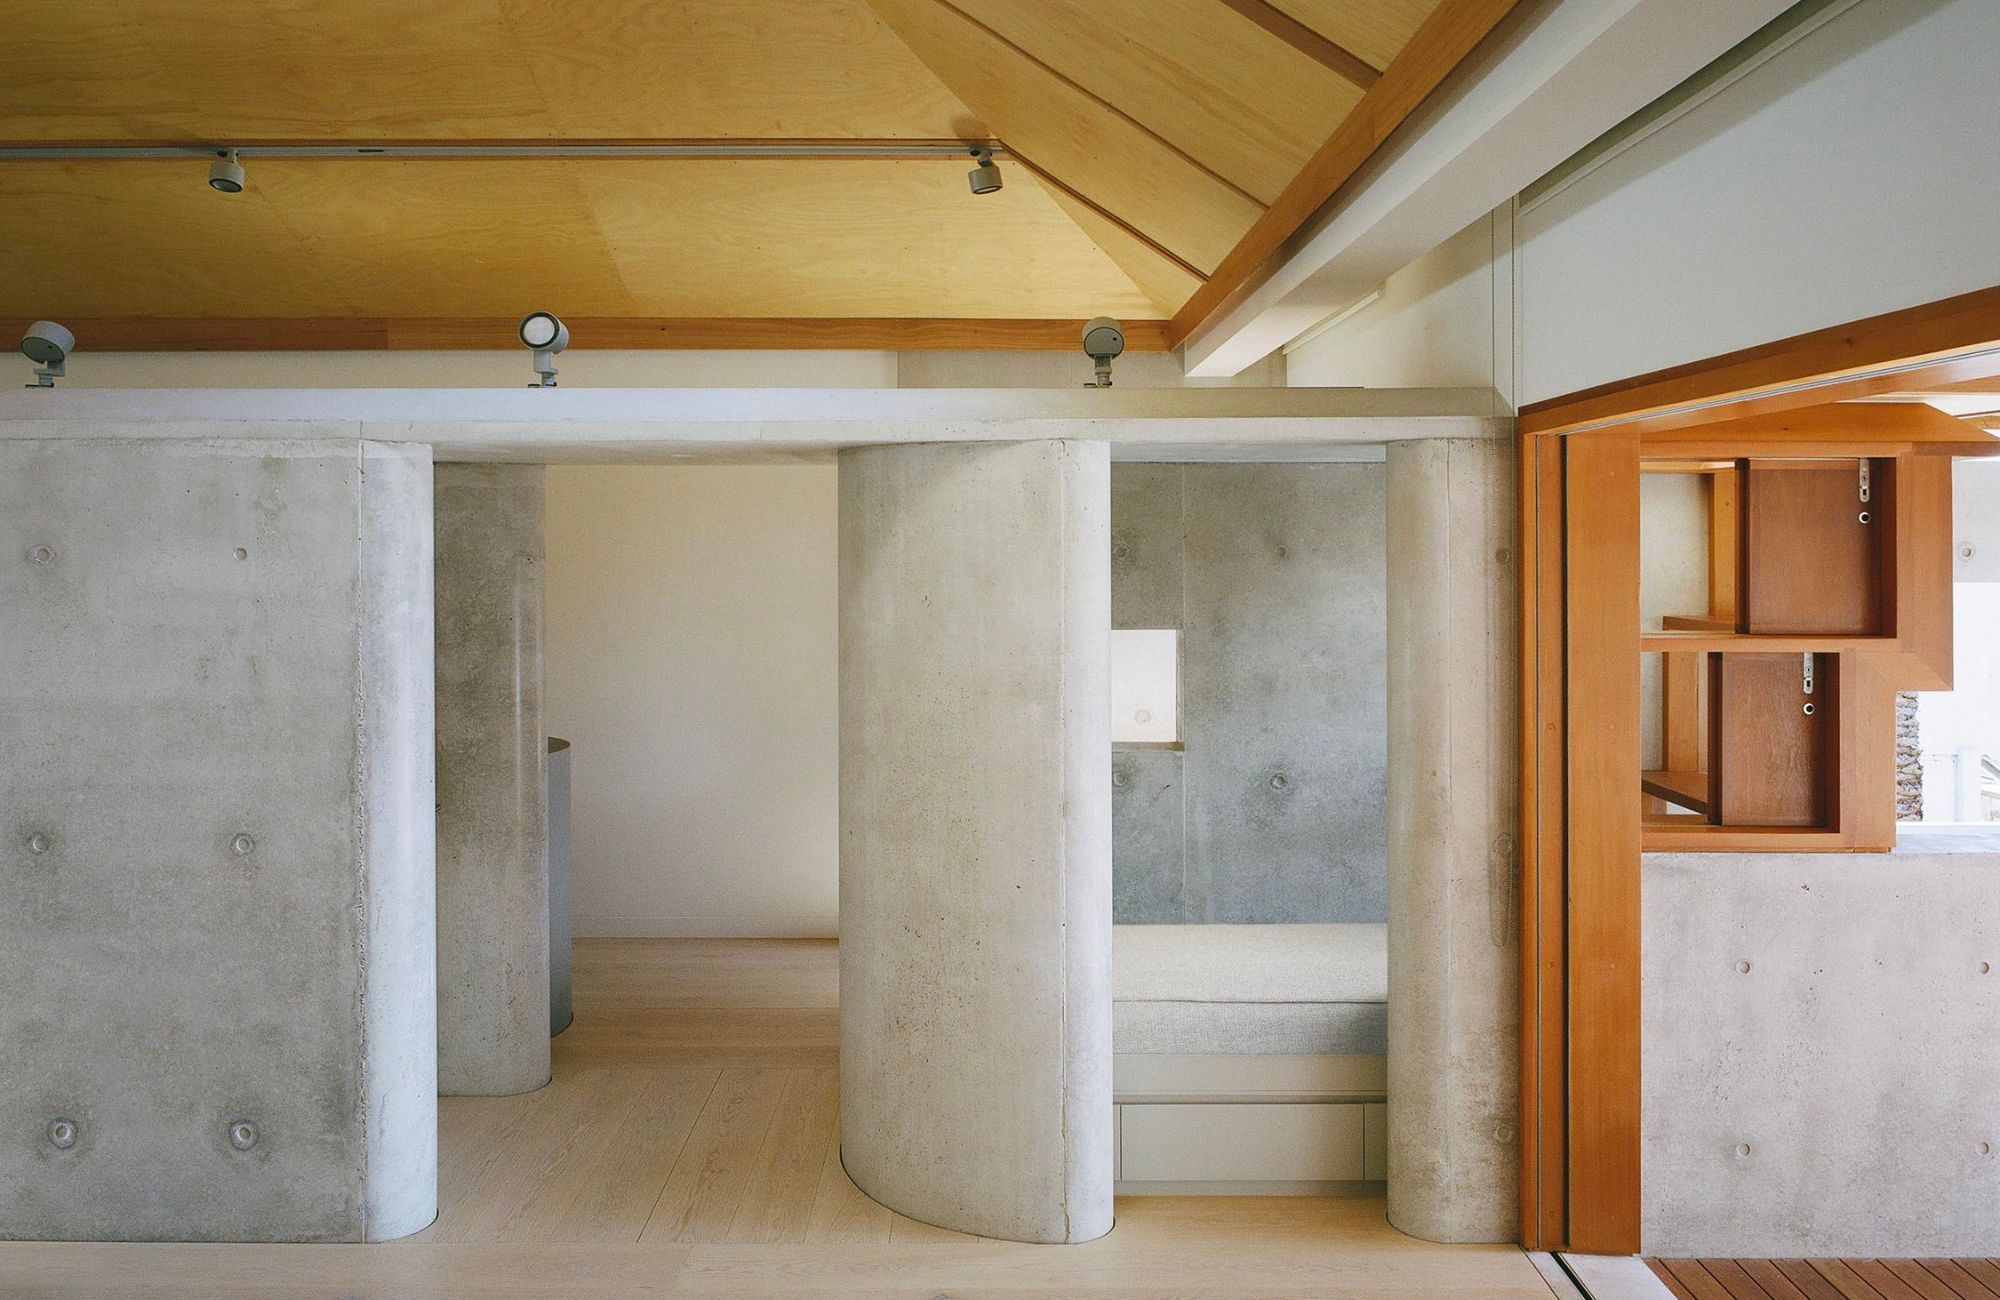 Lee House by Candalepas Associates showing concrete and timber interior